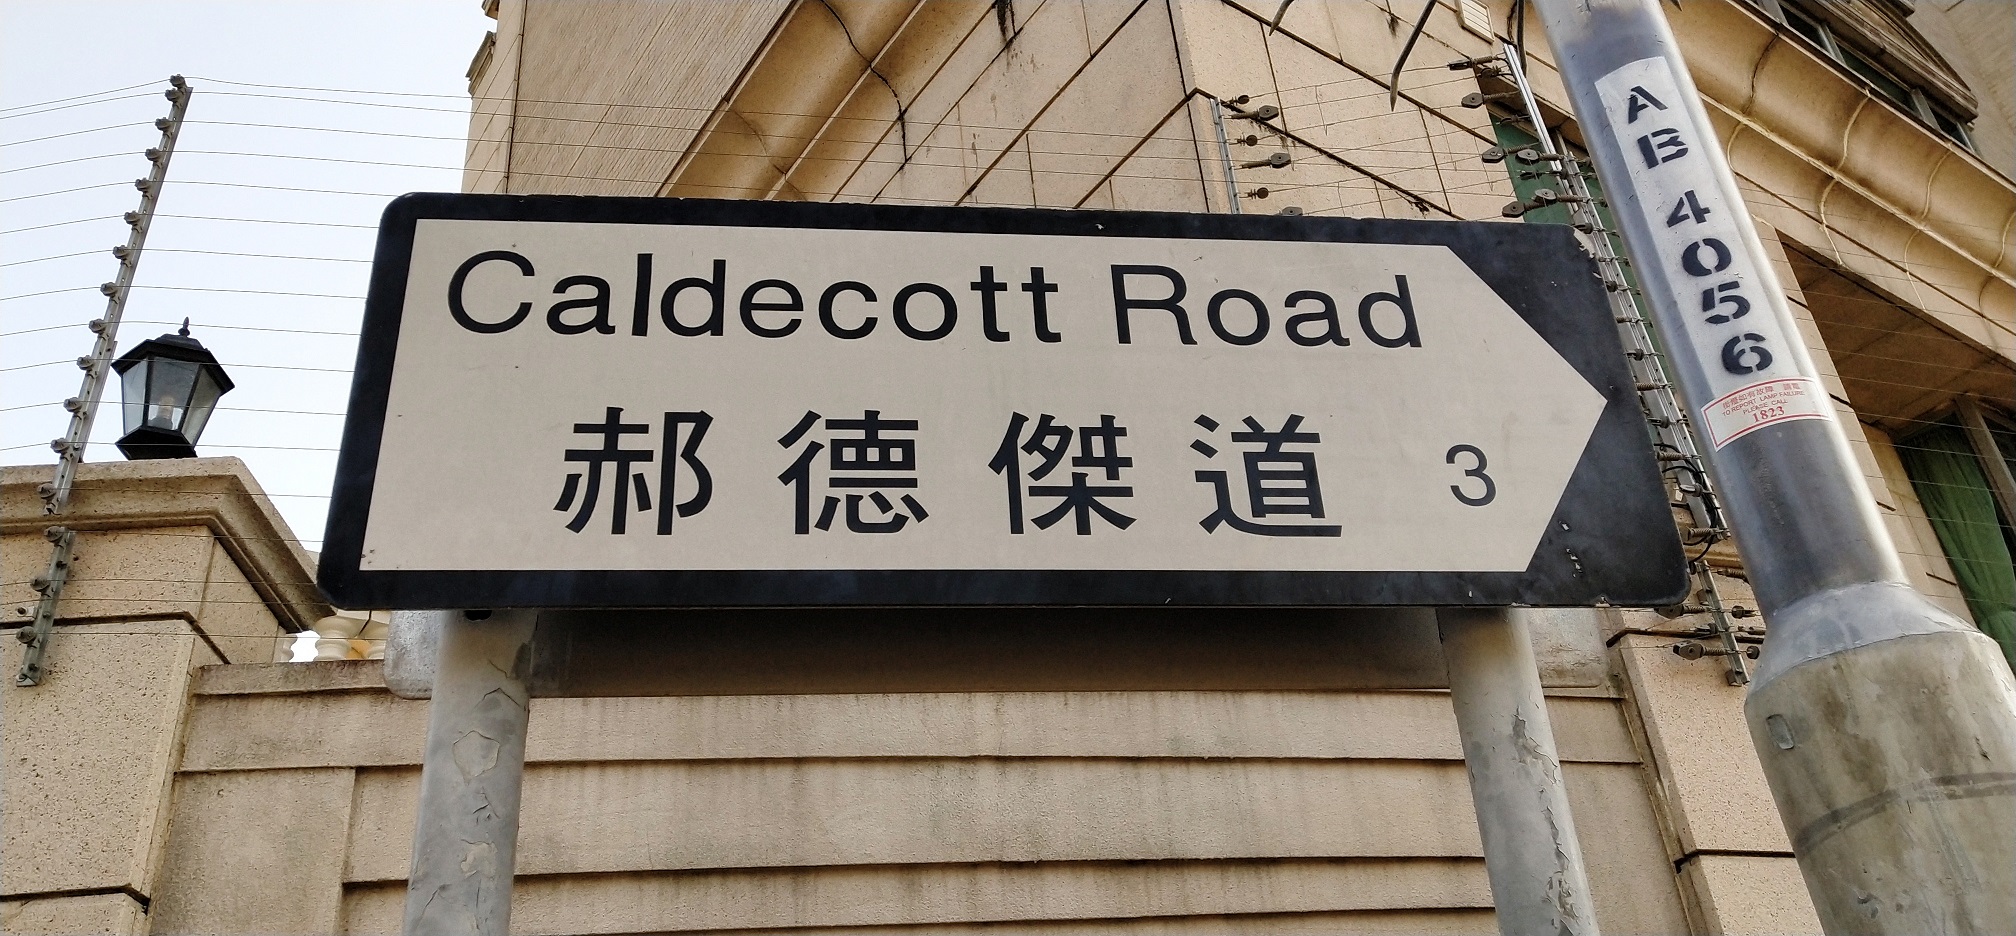 It is easy to go to Caldecott Road by private car.